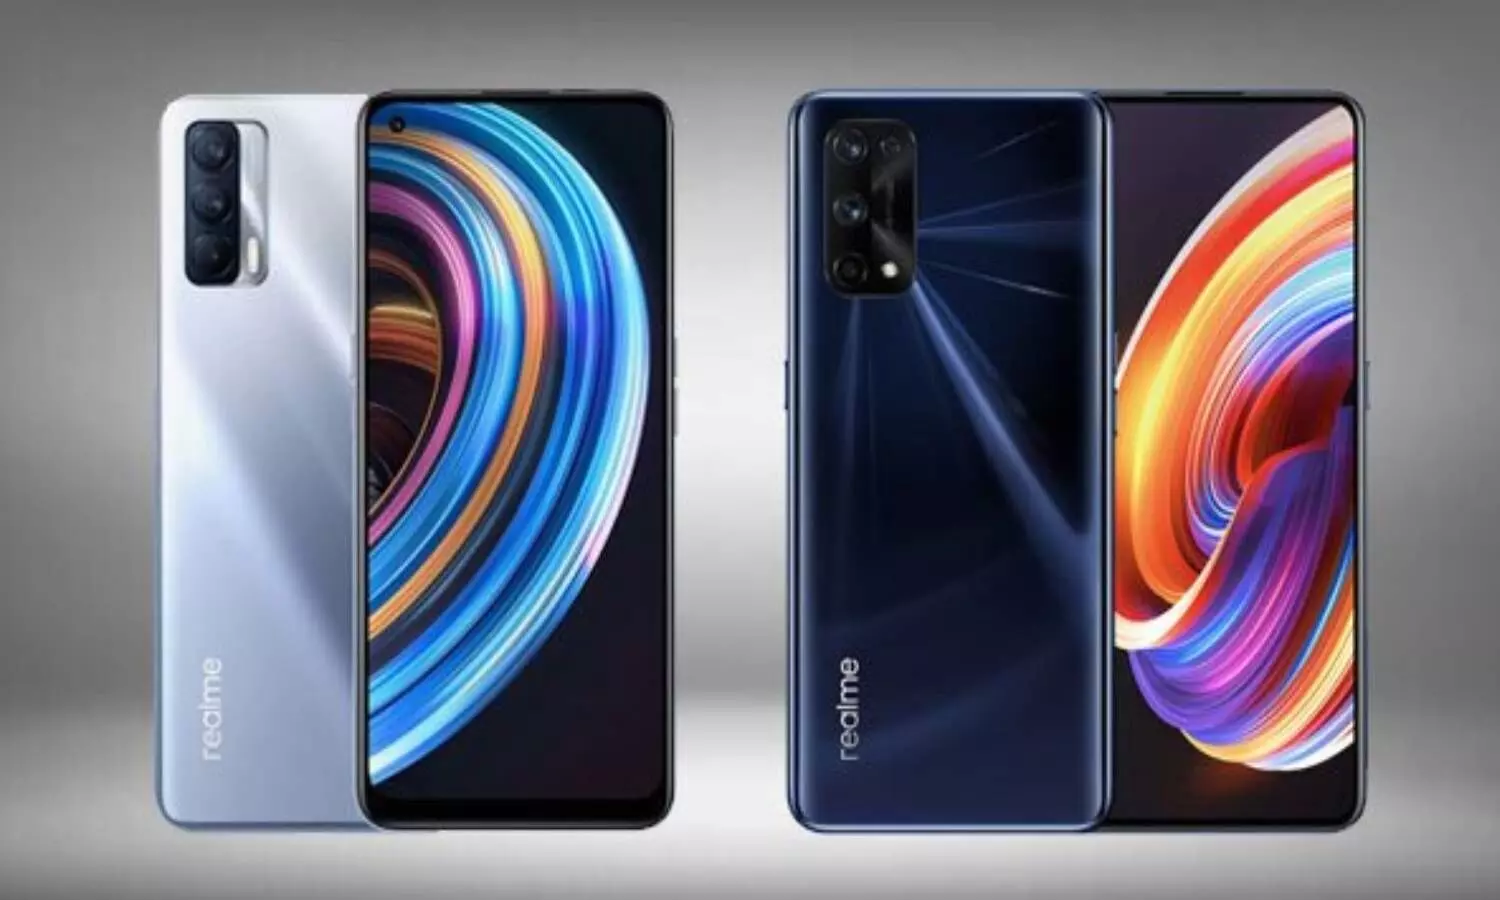 Buy Realme X7, Realme X7 Pro from Flipkart Carnival sale at discounted price